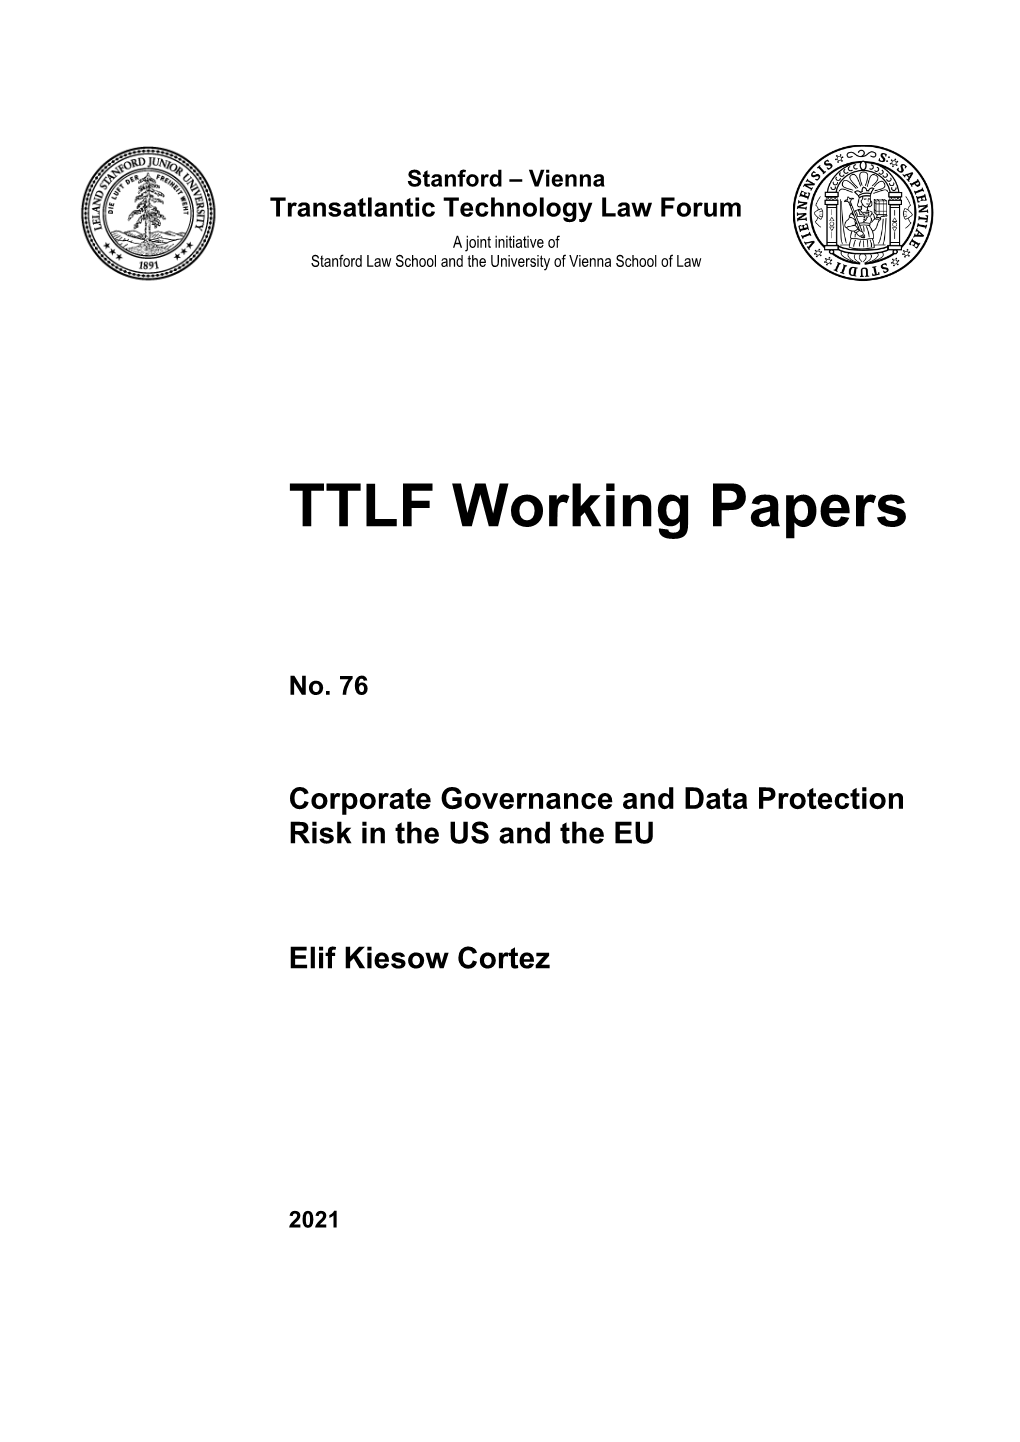 TTLF Working Papers